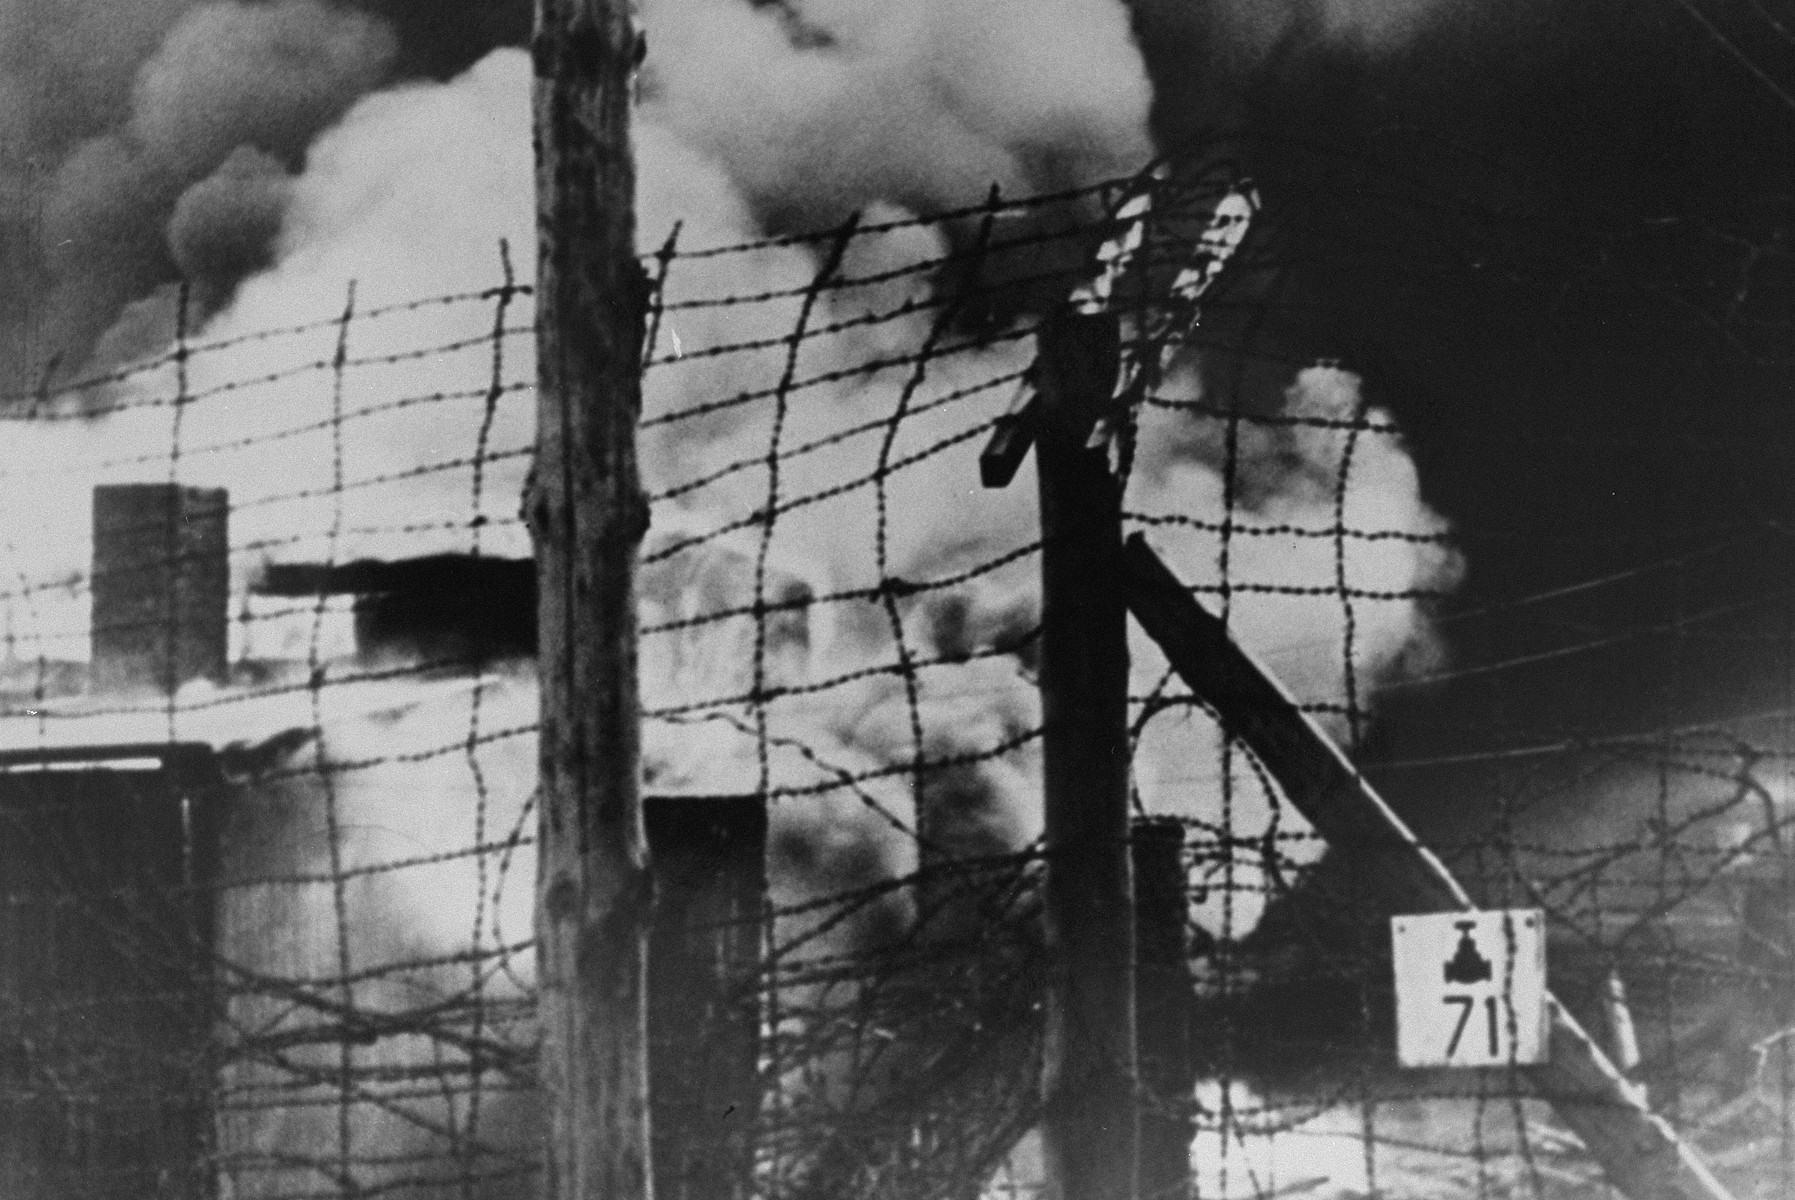 View of the burning barracks in camp no. 1 in Bergen-Belsen to prevent the spread of typhus.